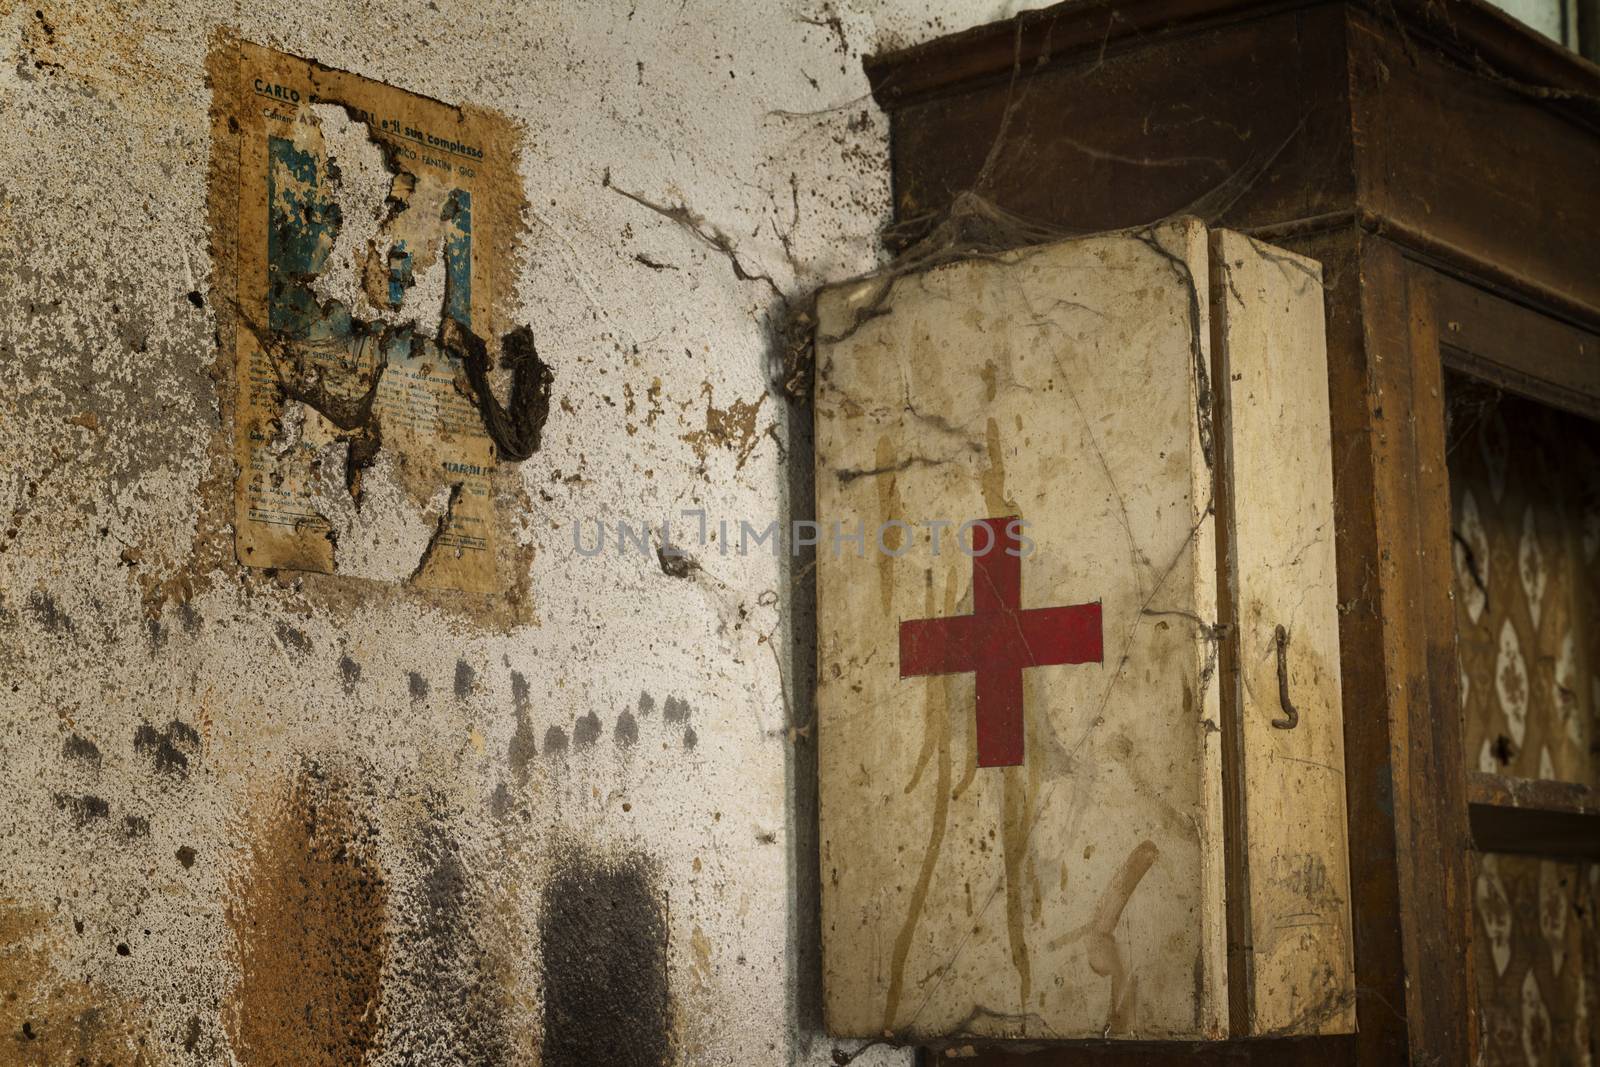 An old first aid kit on a dirty and rusty wall covered by cobwebs